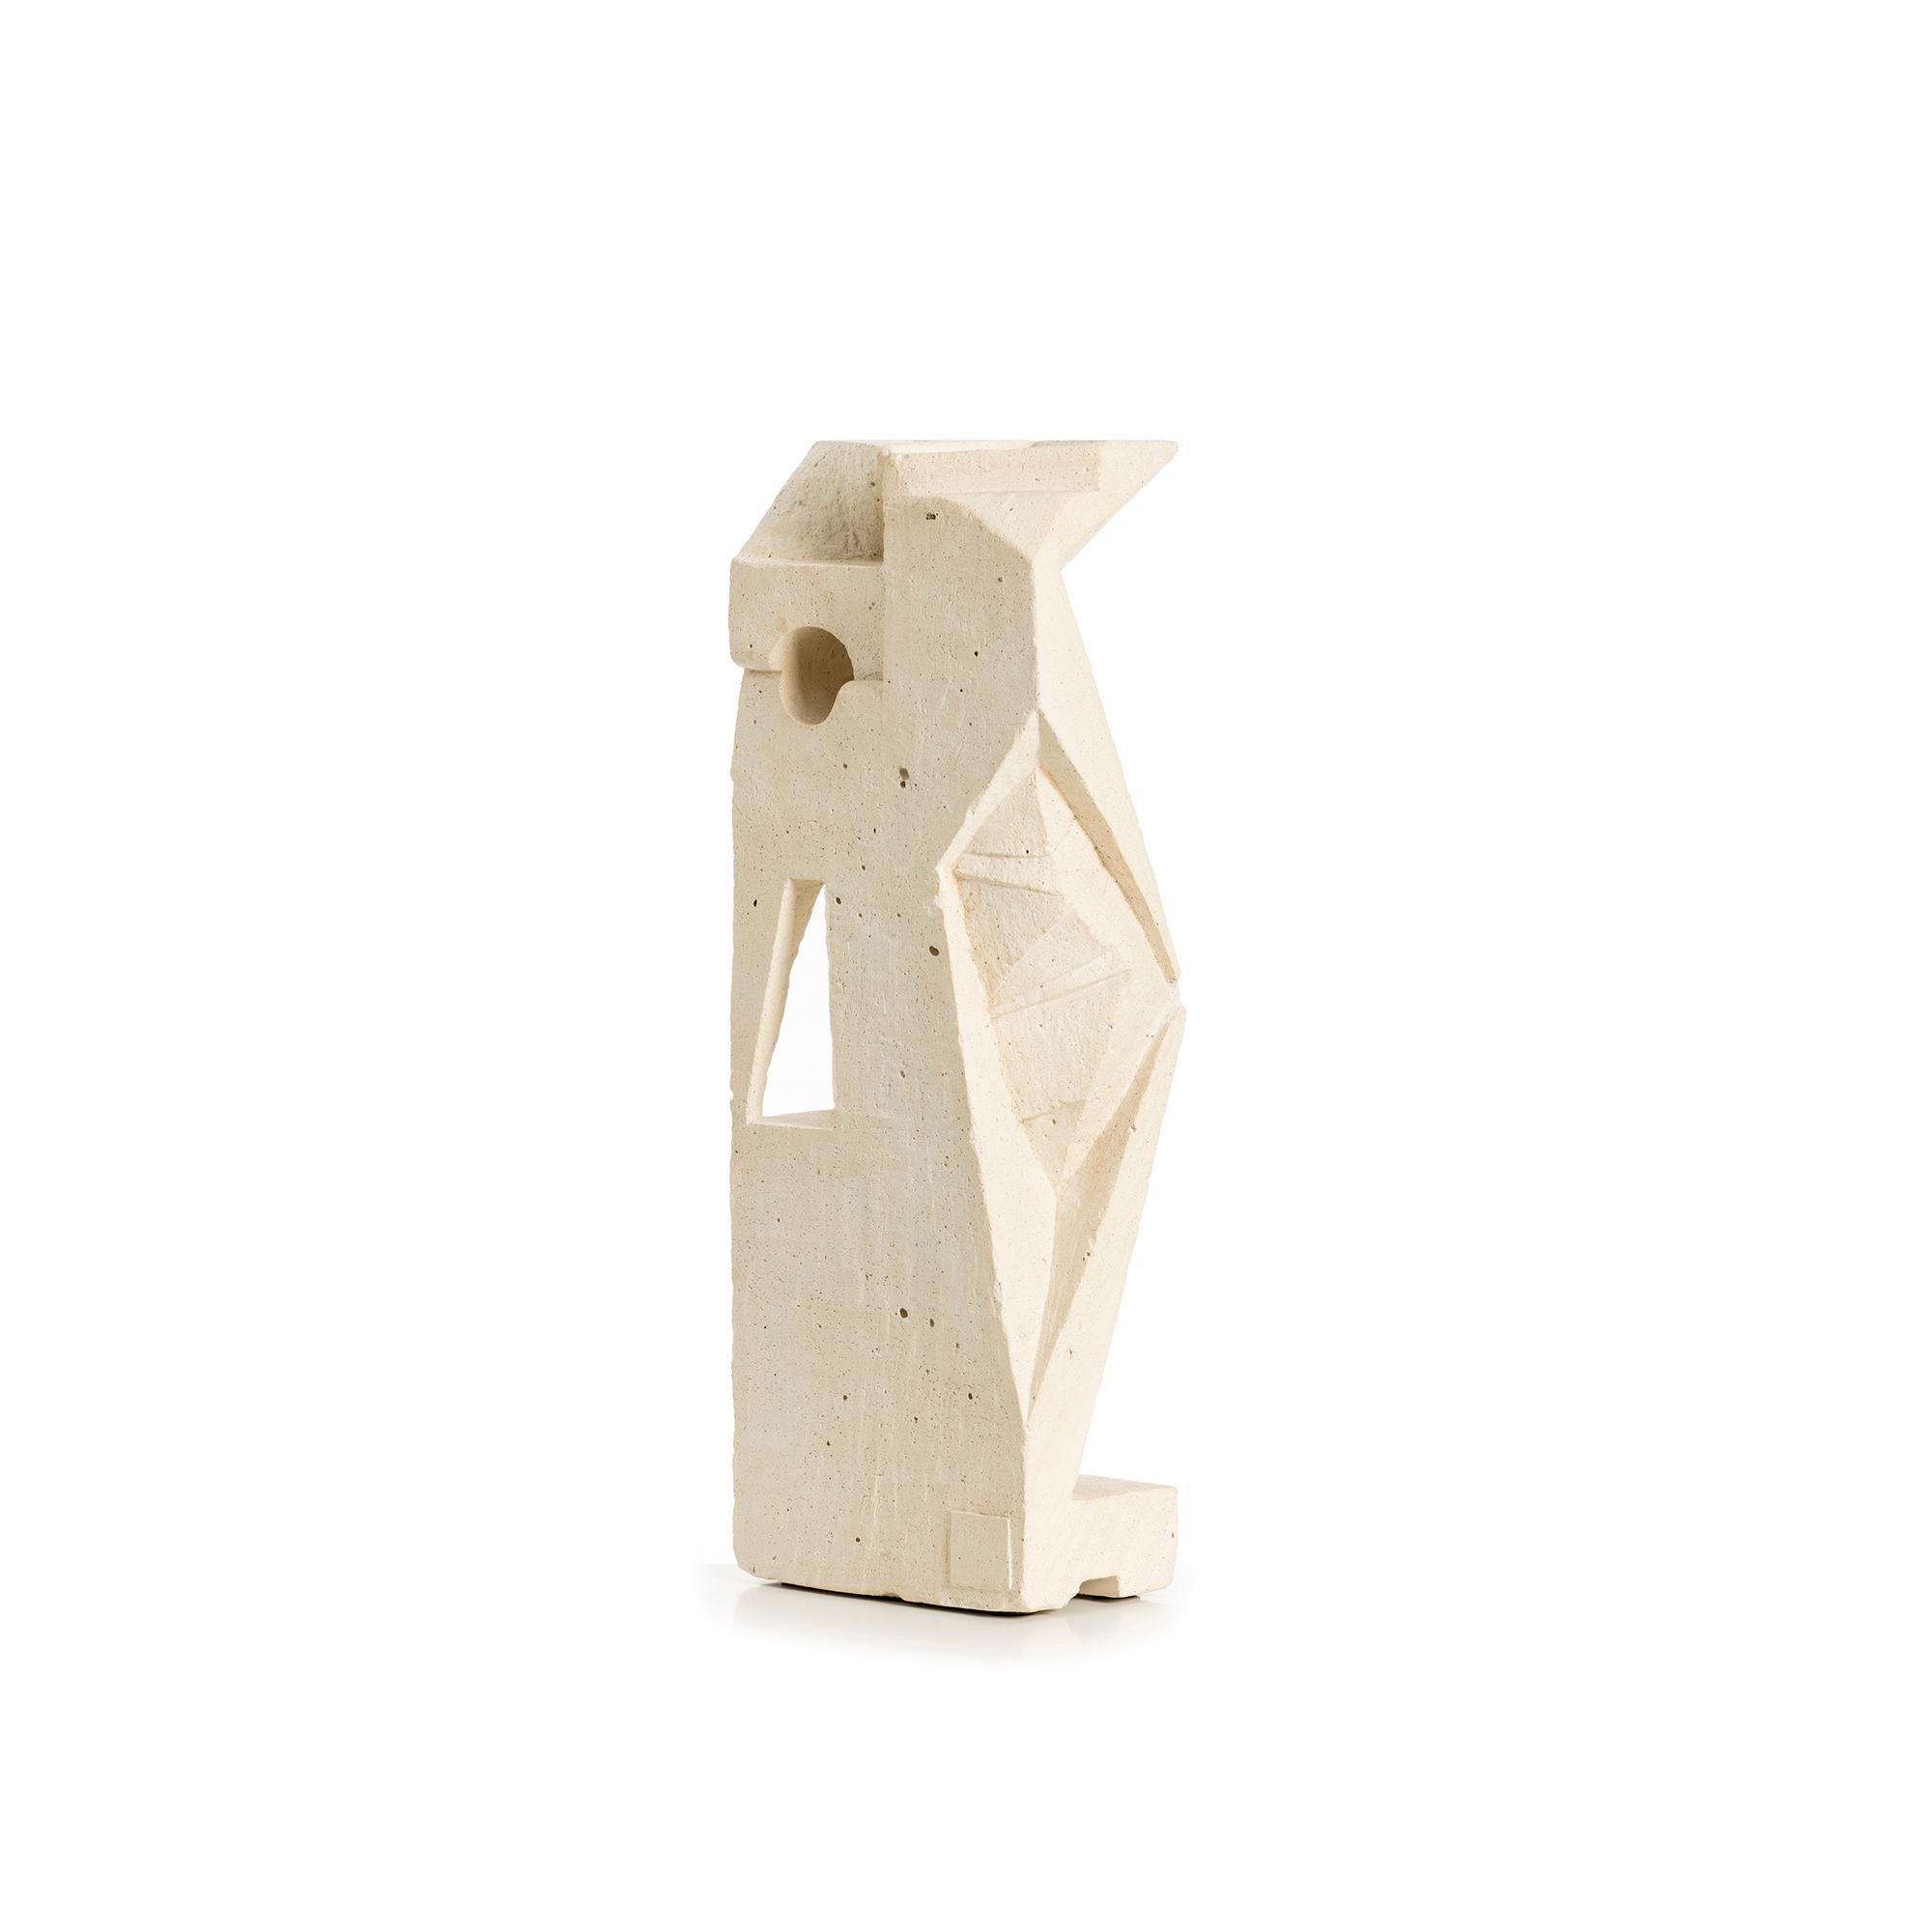 Discover a captivating piece of art with this vintage clay sculpture, featuring striking geometric lines and shapes. Crafted in the 1970s, this sculpture embodies the artistic trends of its time, showcasing a unique blend of modernist design and